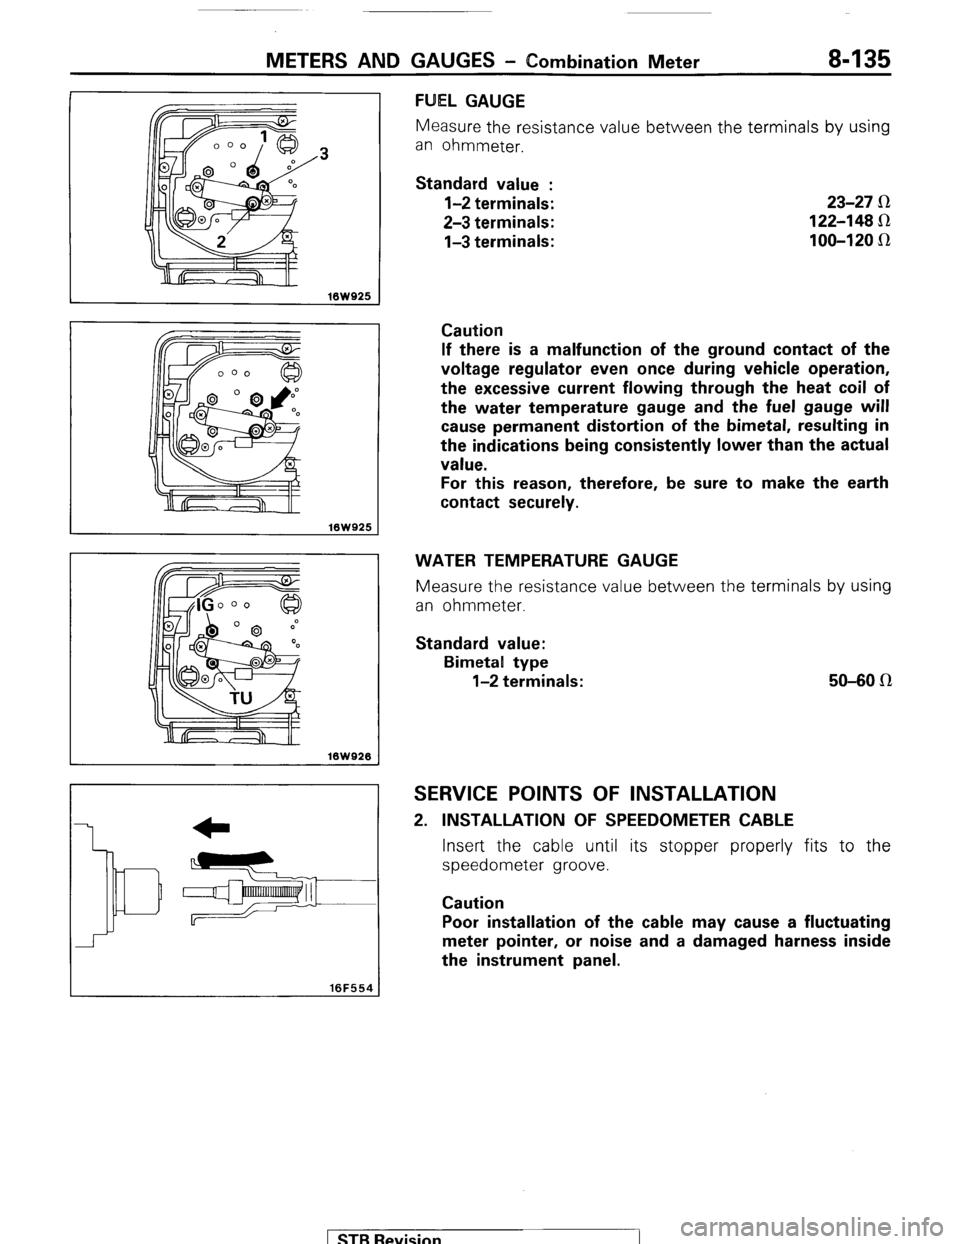 MITSUBISHI MONTERO 1987 1.G Workshop Manual METERS AND GAUGES - Combination Meter 8-135 
.3 
16WQ25 
16W925 
10W926 
16F554 
FUEL GAUGE 
Measure the resistance value between t.he terminals by using 
an ohmmeter. 
Standard value : 
l-2 terminals